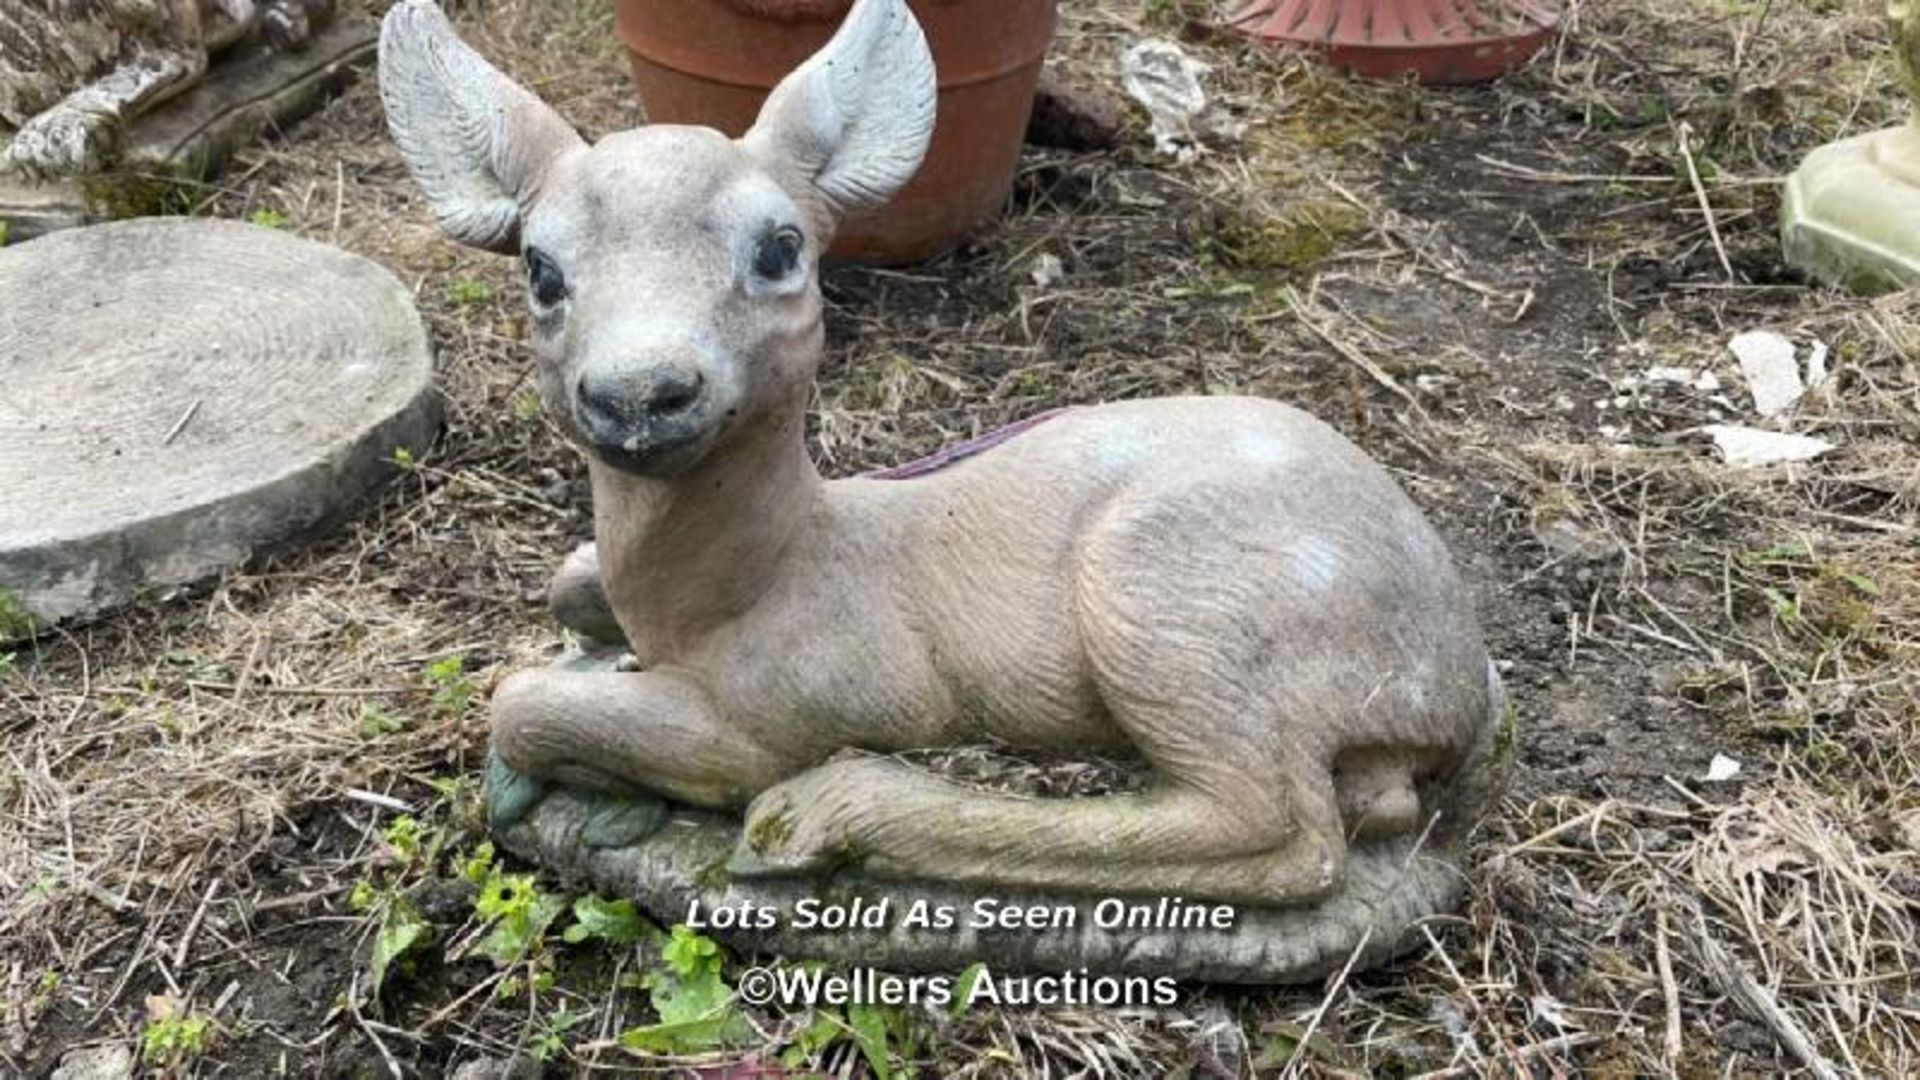 *YOUNG DEER, 30CM (H) X 40CM (L) / COLLECTION LOCATION: ALBOURNE (BN6), FULL ADDRESS AND CONTACT